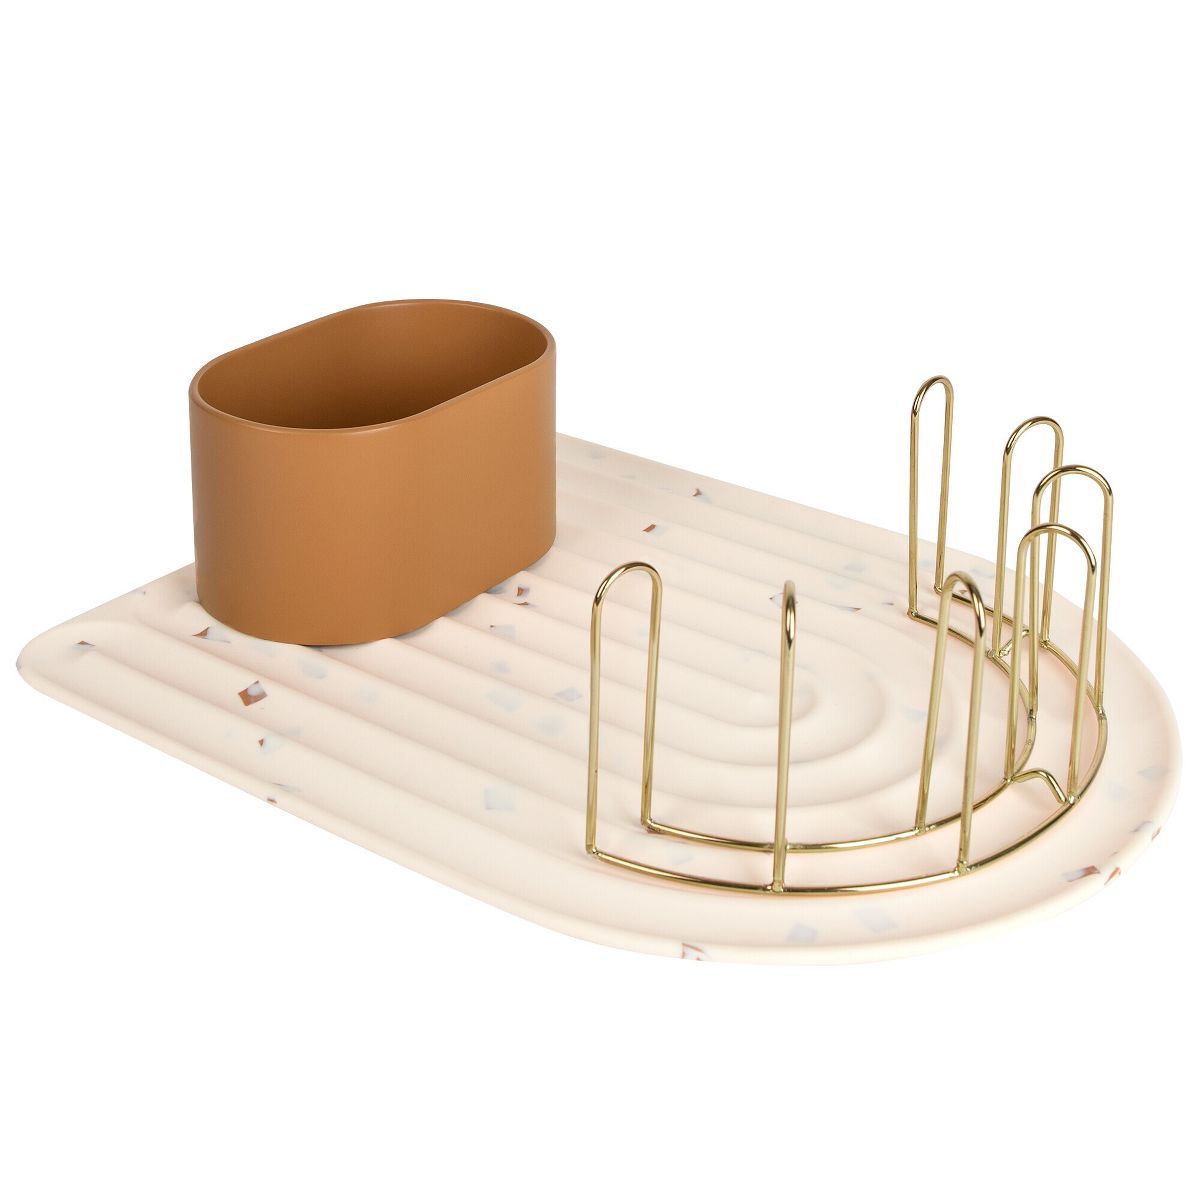 Boon ARC Silicone Bottle Drying Rack | Target